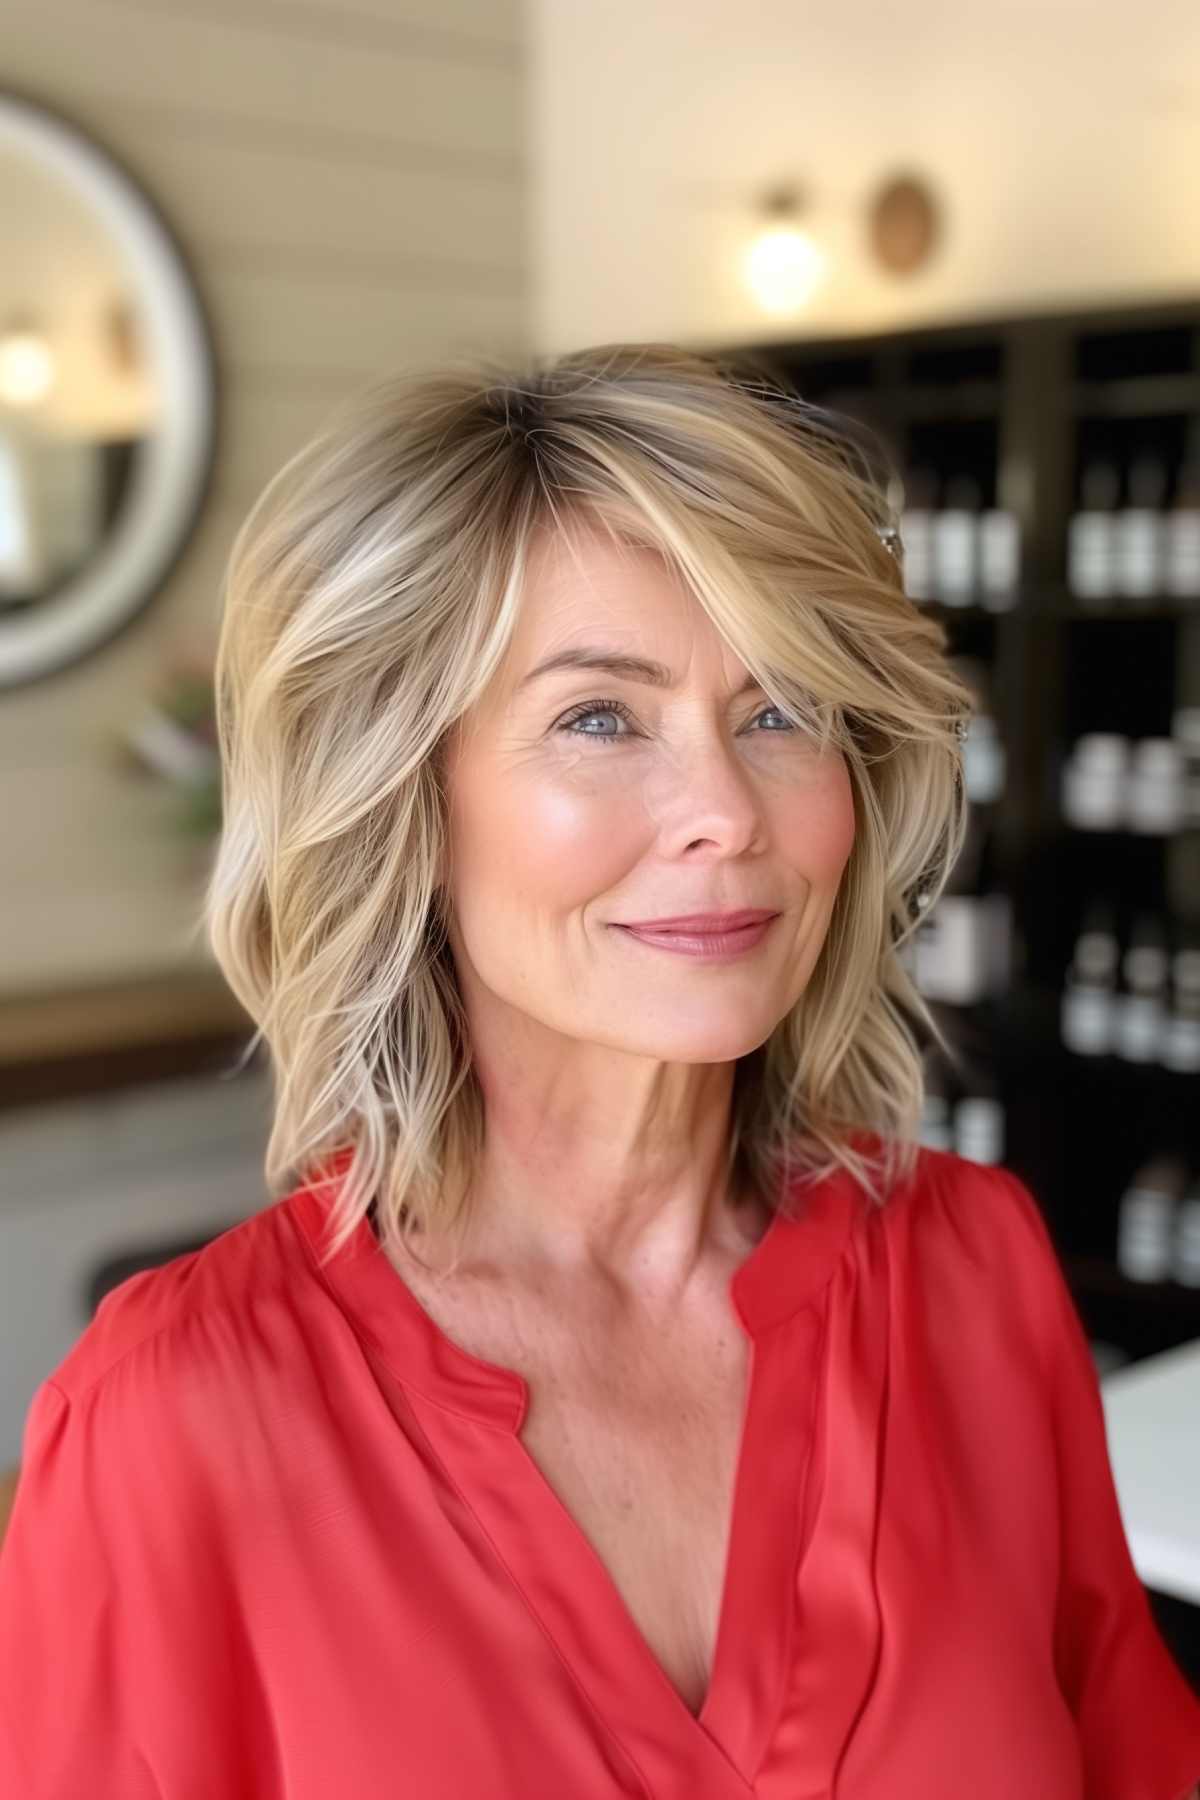 A woman with a layered cut featuring soft waves, blonde highlights and side-swept bangs.